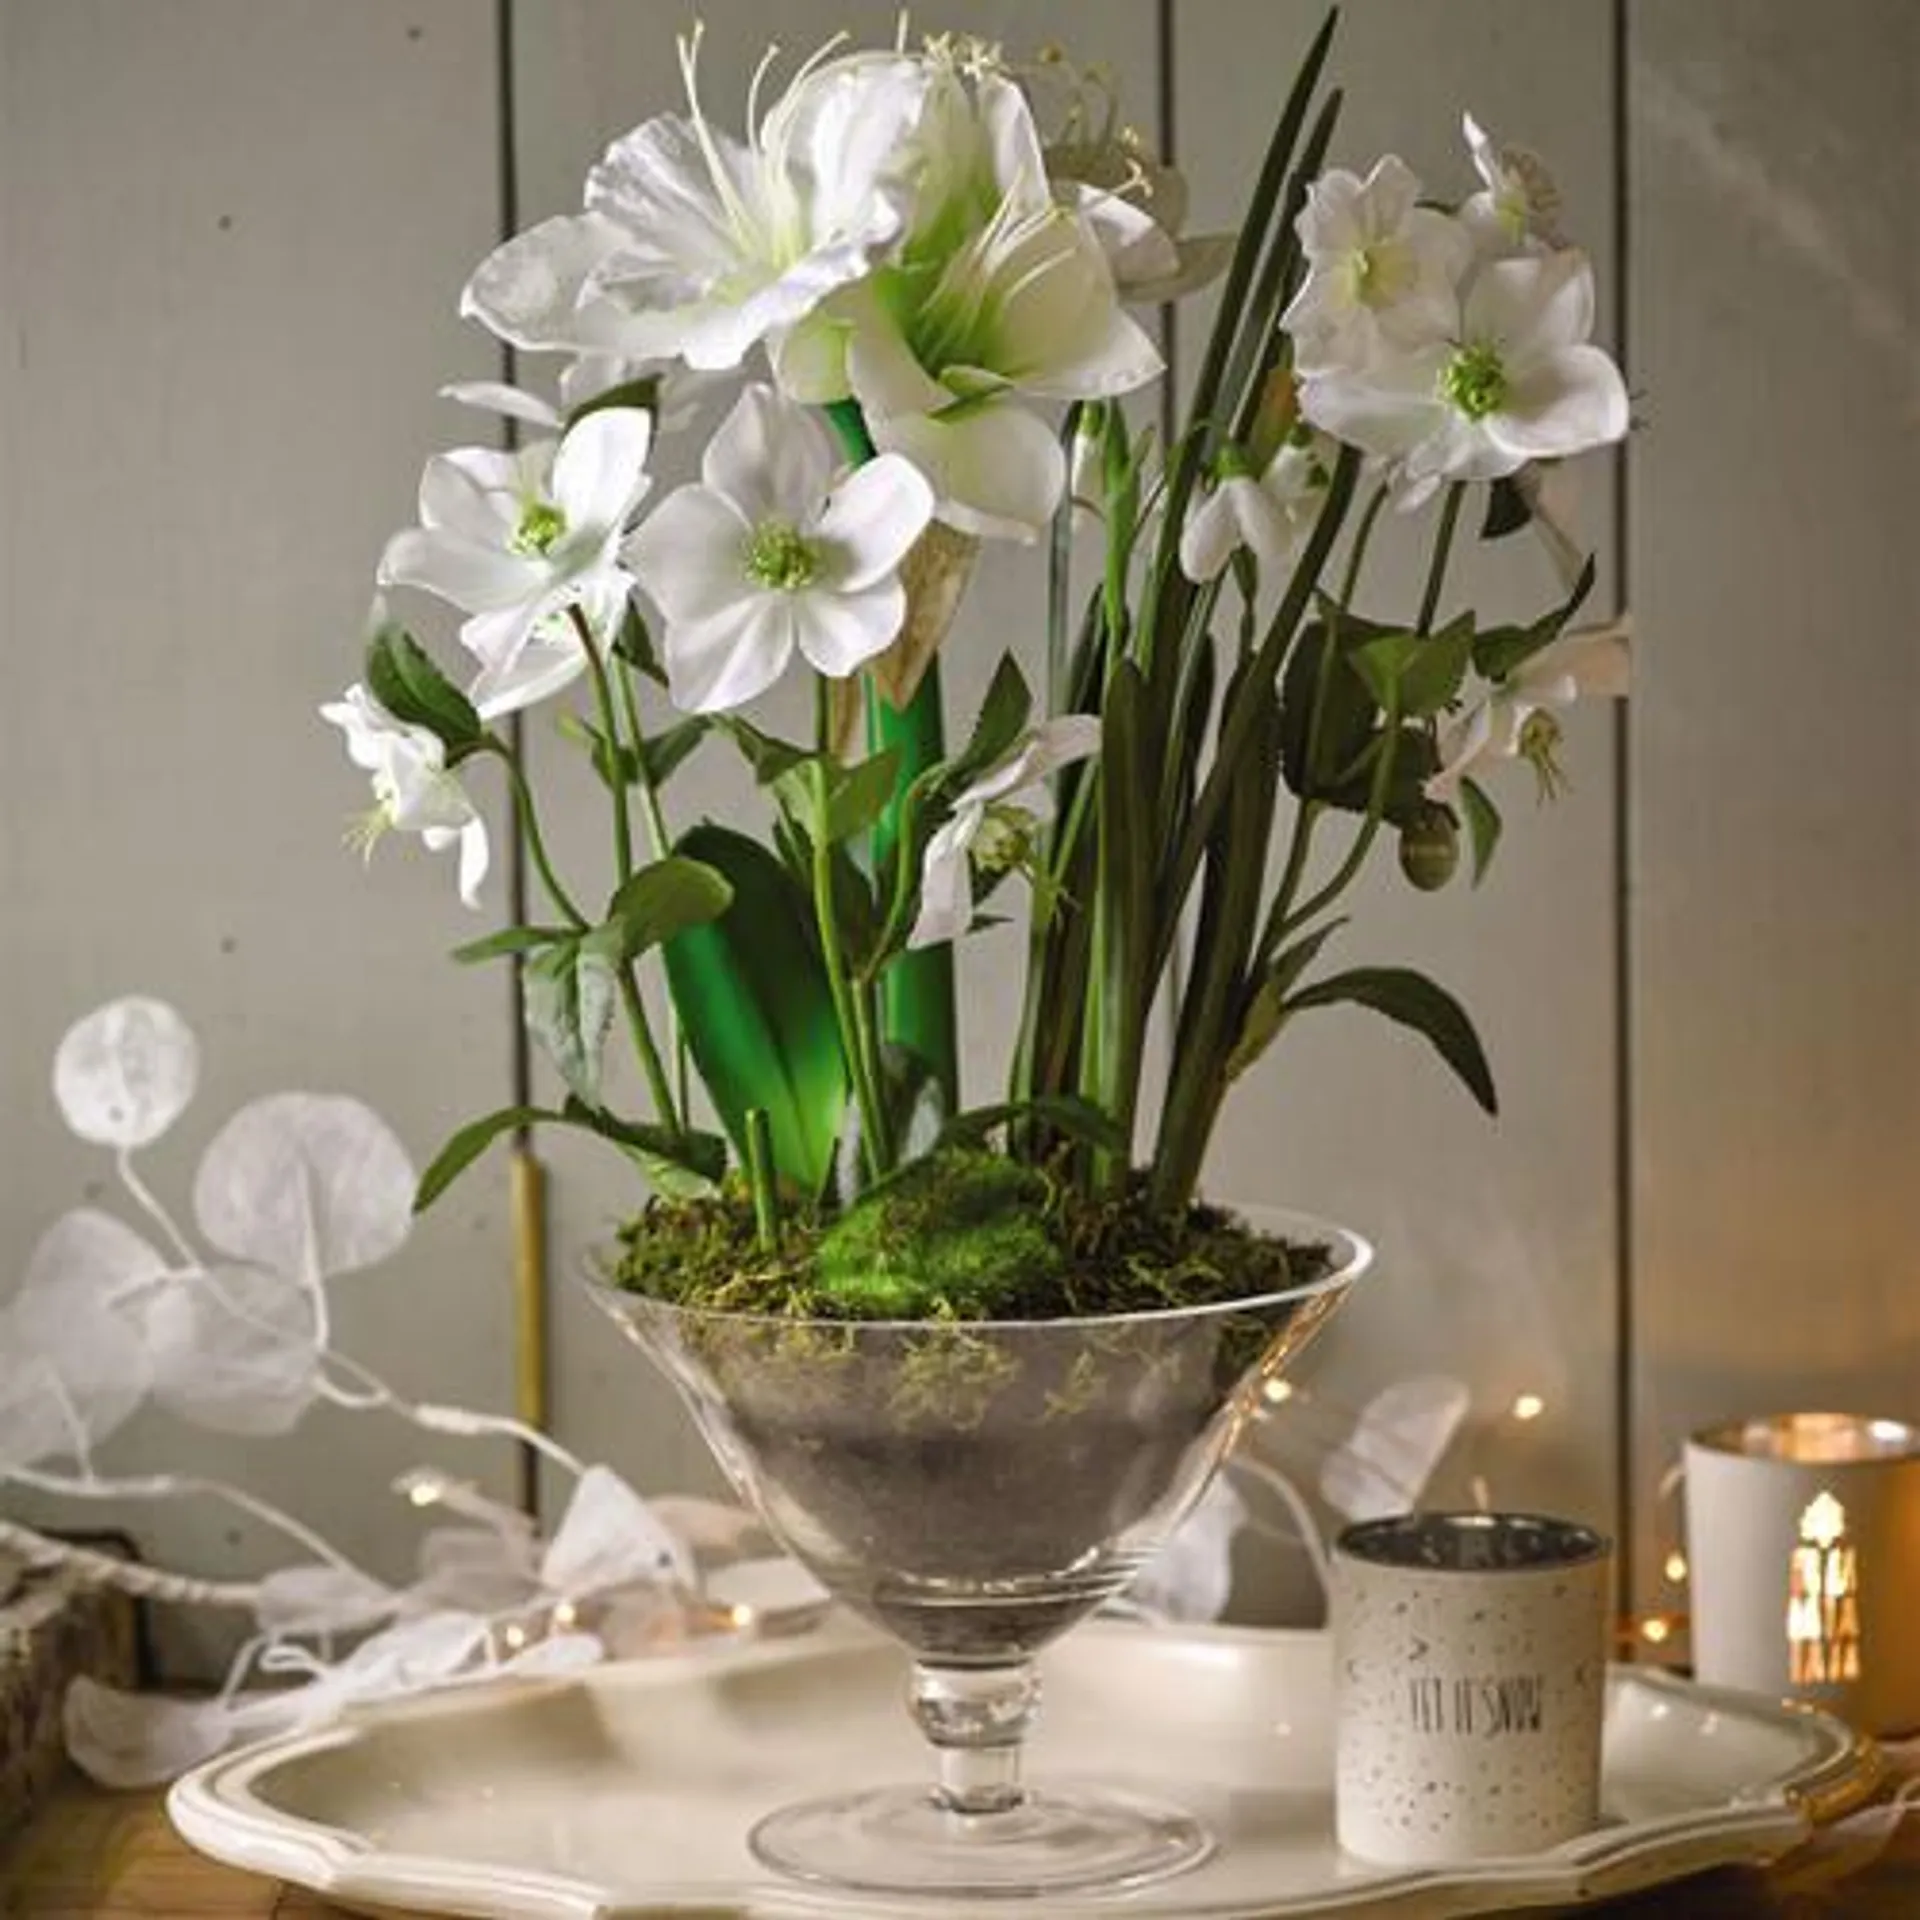 White Amaryllis in a Footed Glass Vase